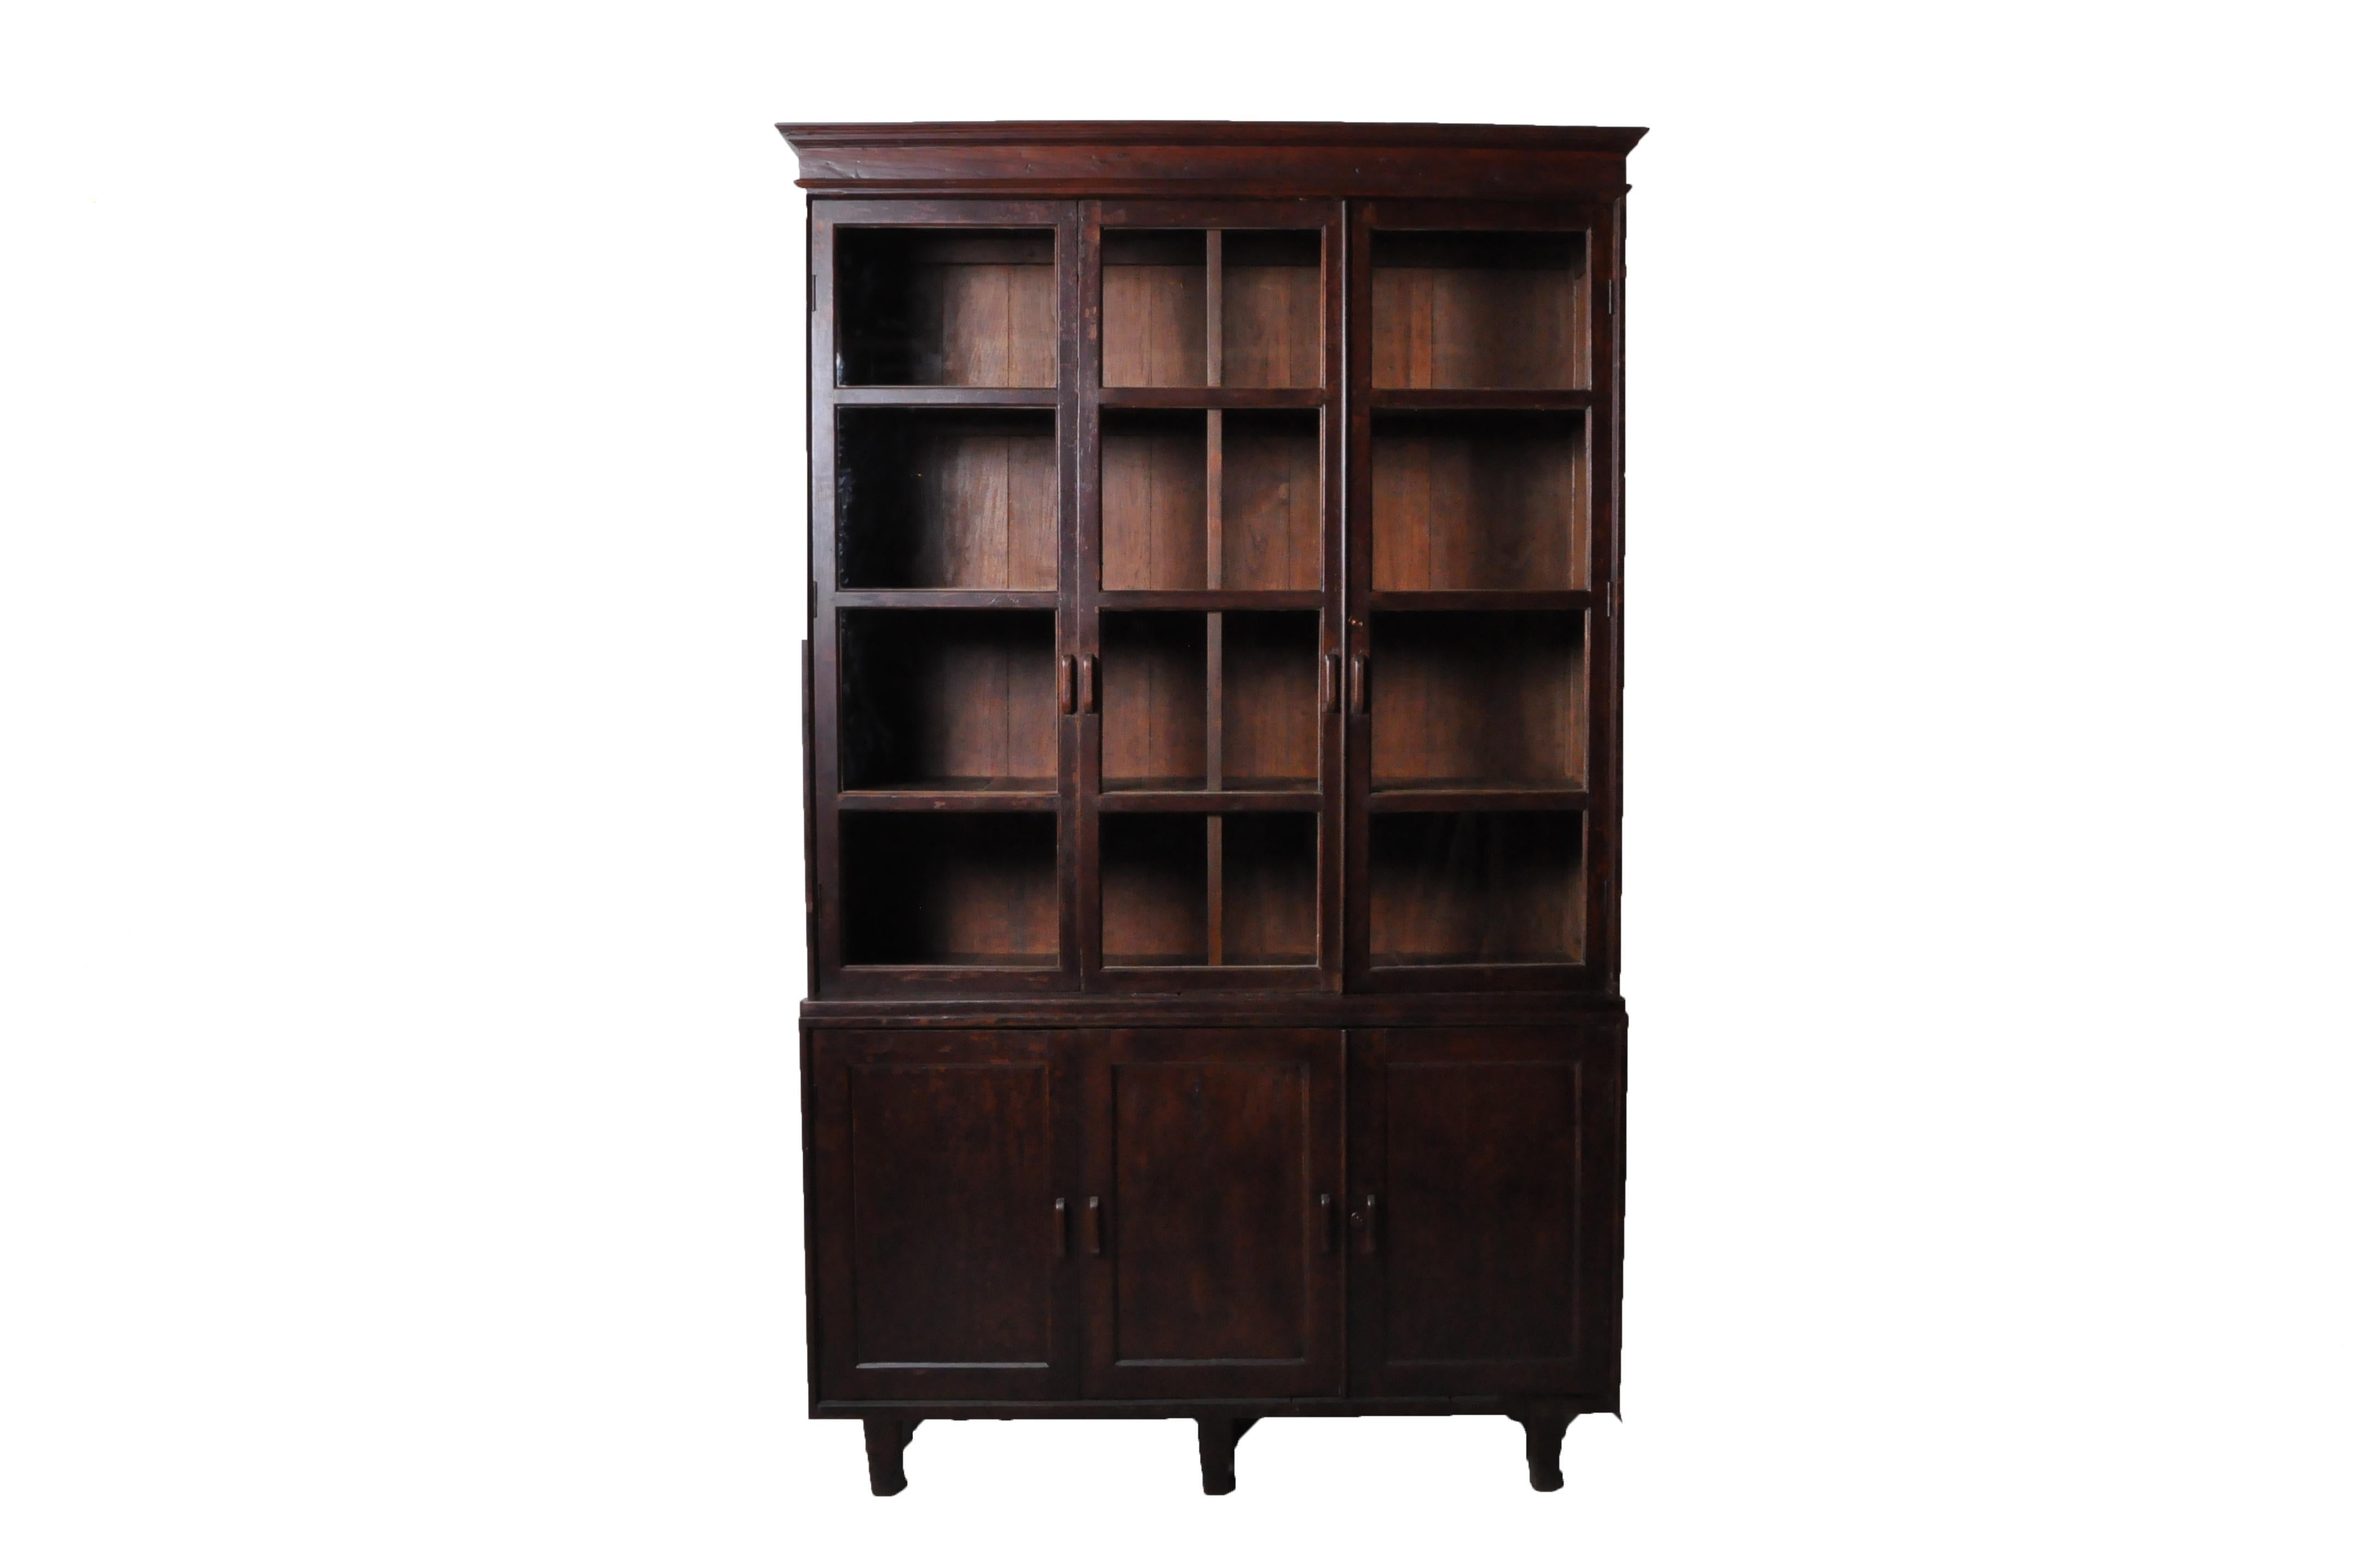 This impressively-scaled book cabinet was made from solid Teak wood and dates to the 1920's. During the late British empire in India and Burma much furniture was made in the Art Deco Style using local hardwoods and native furniture builders. Art